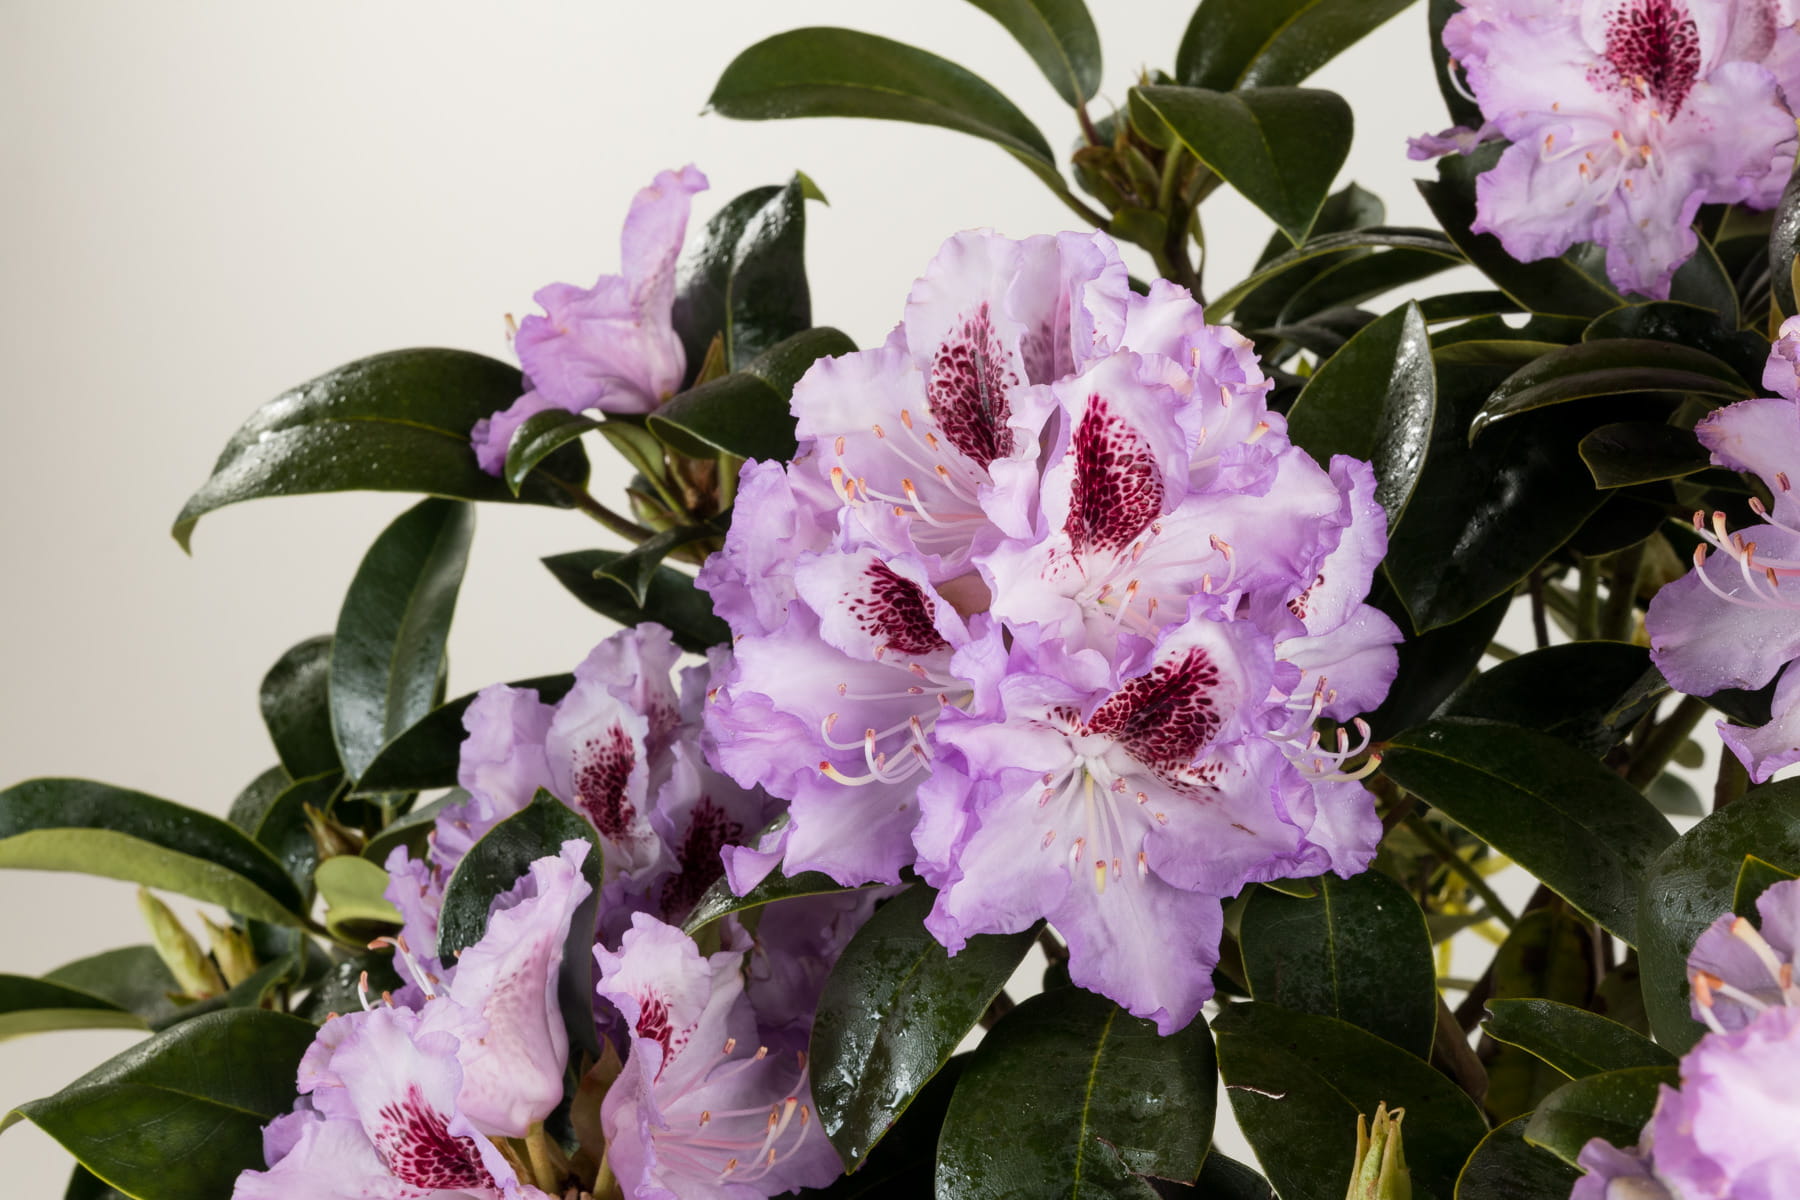 Rhododendron 'Blue Peter' • Rhododendron Hybride 'Blue Peter' Ansicht 1